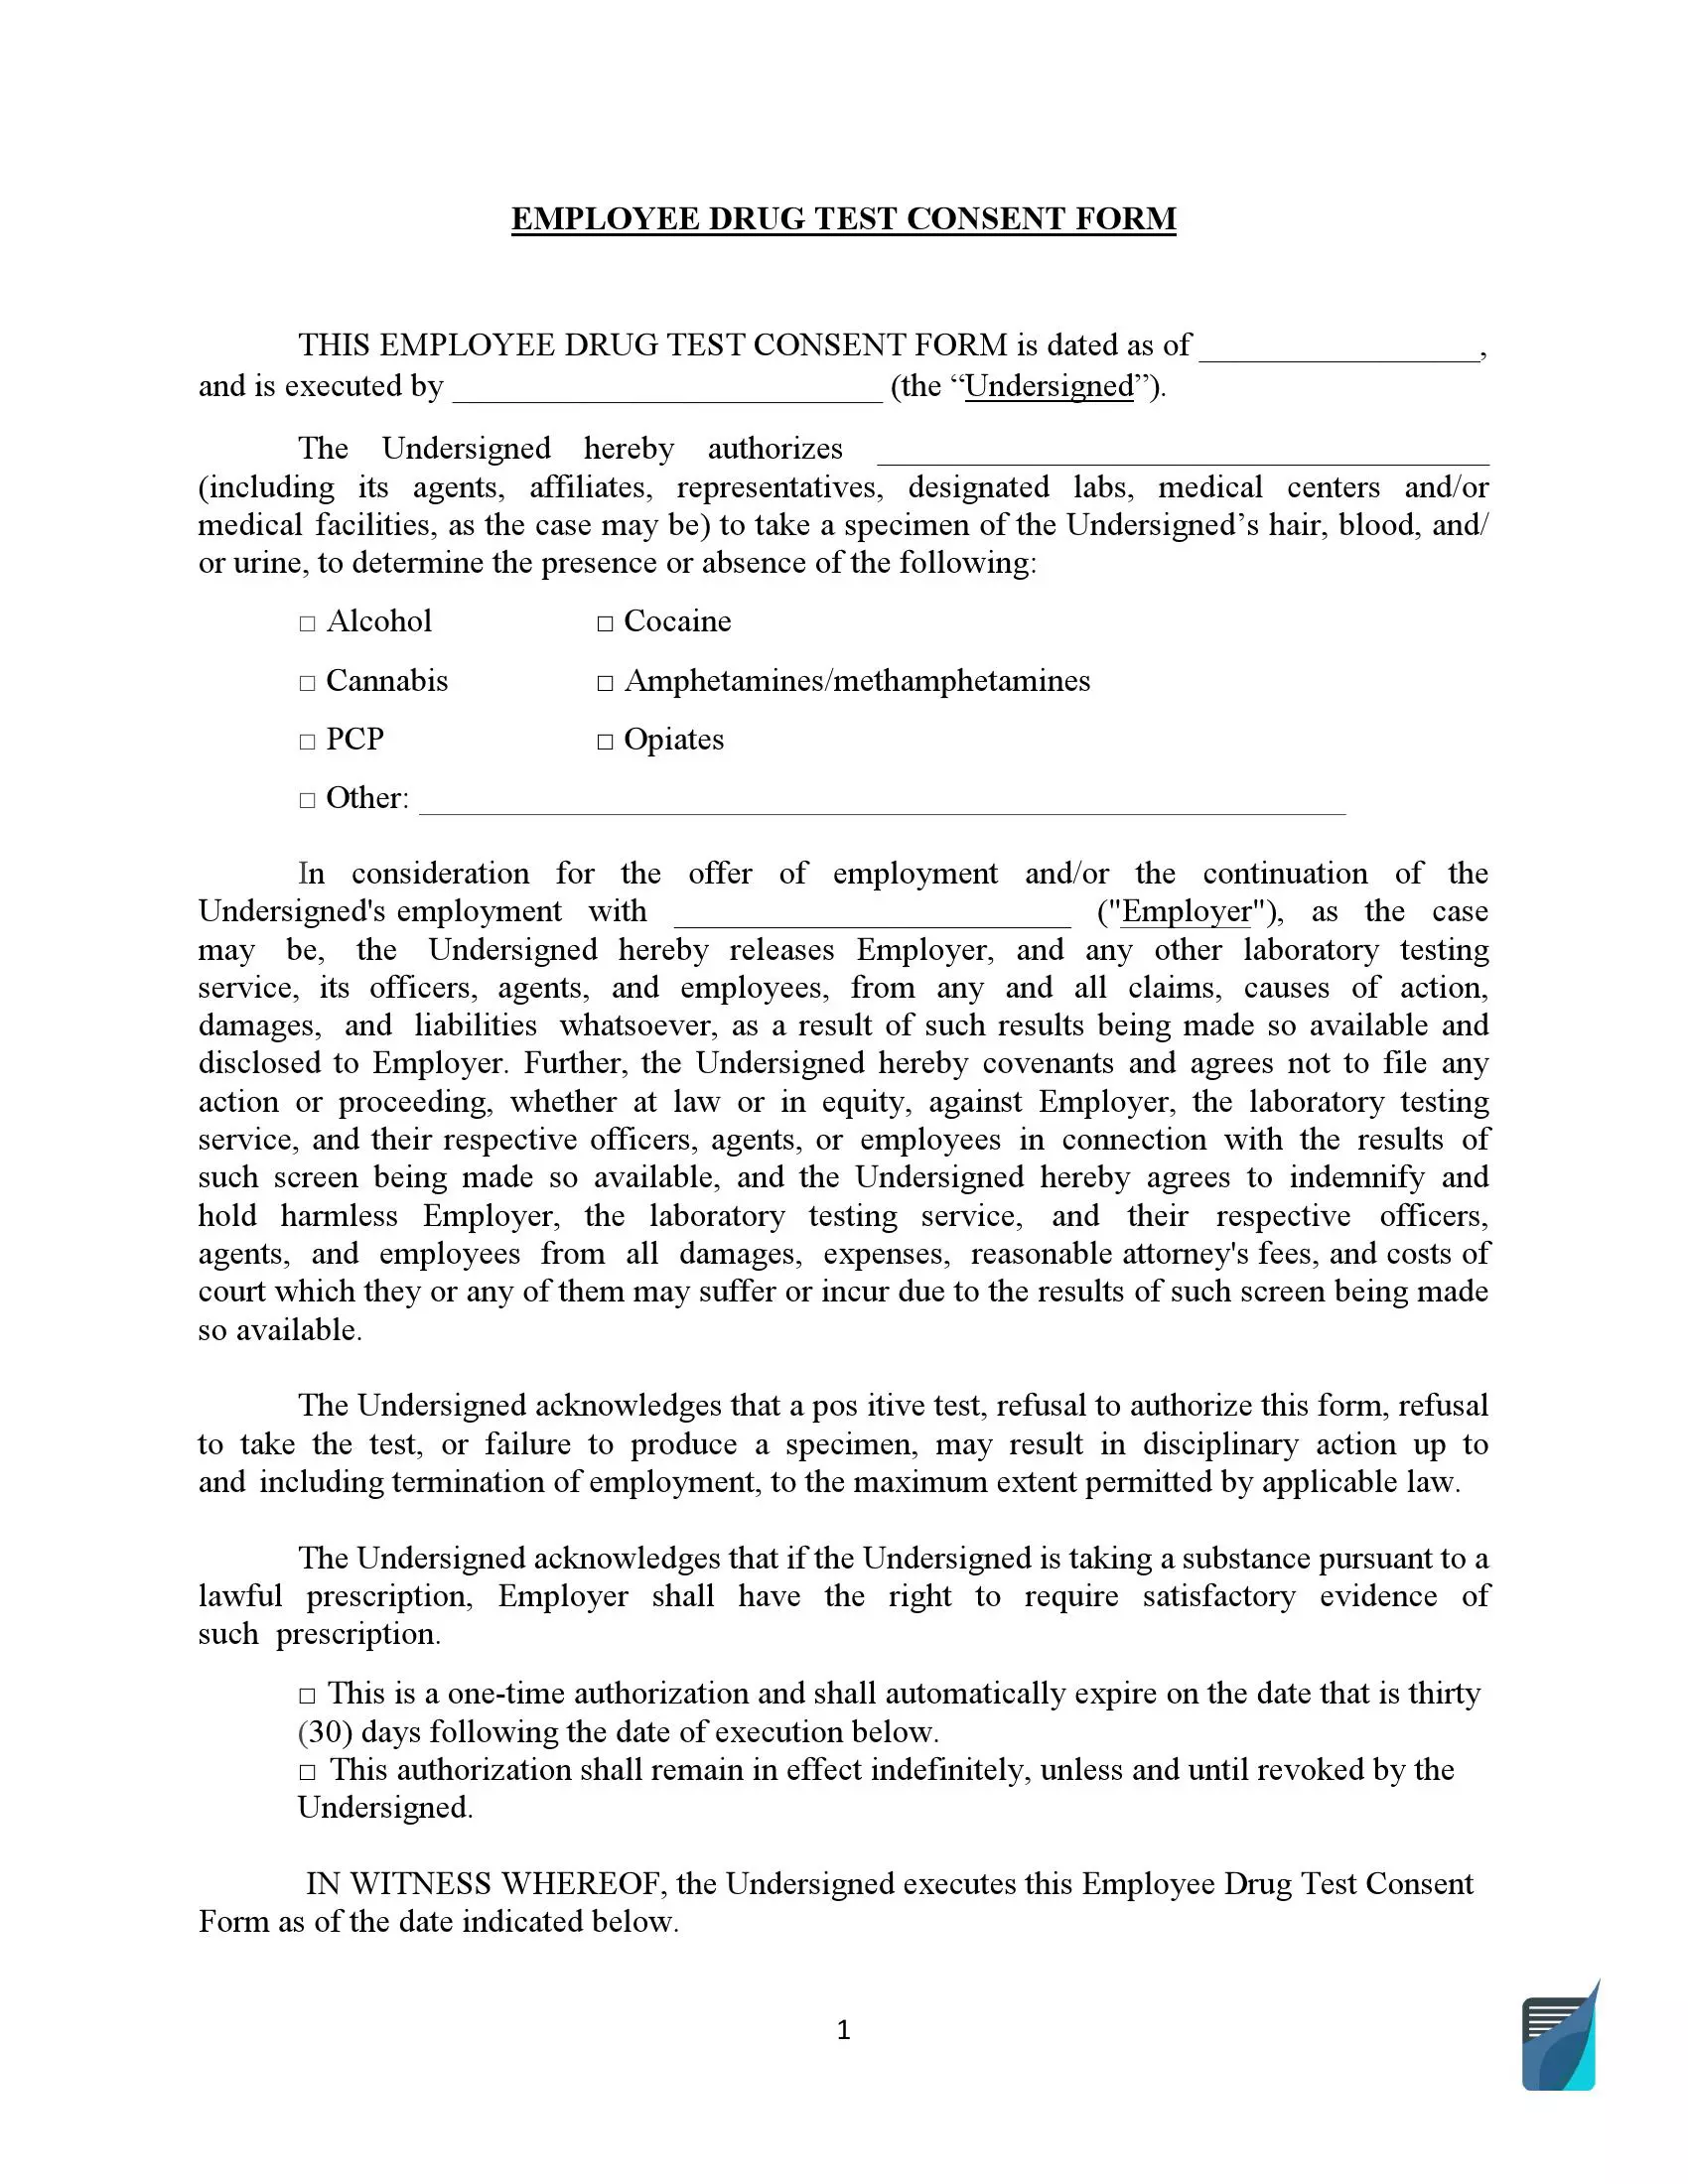 employee-drug-test-consent-form-preview